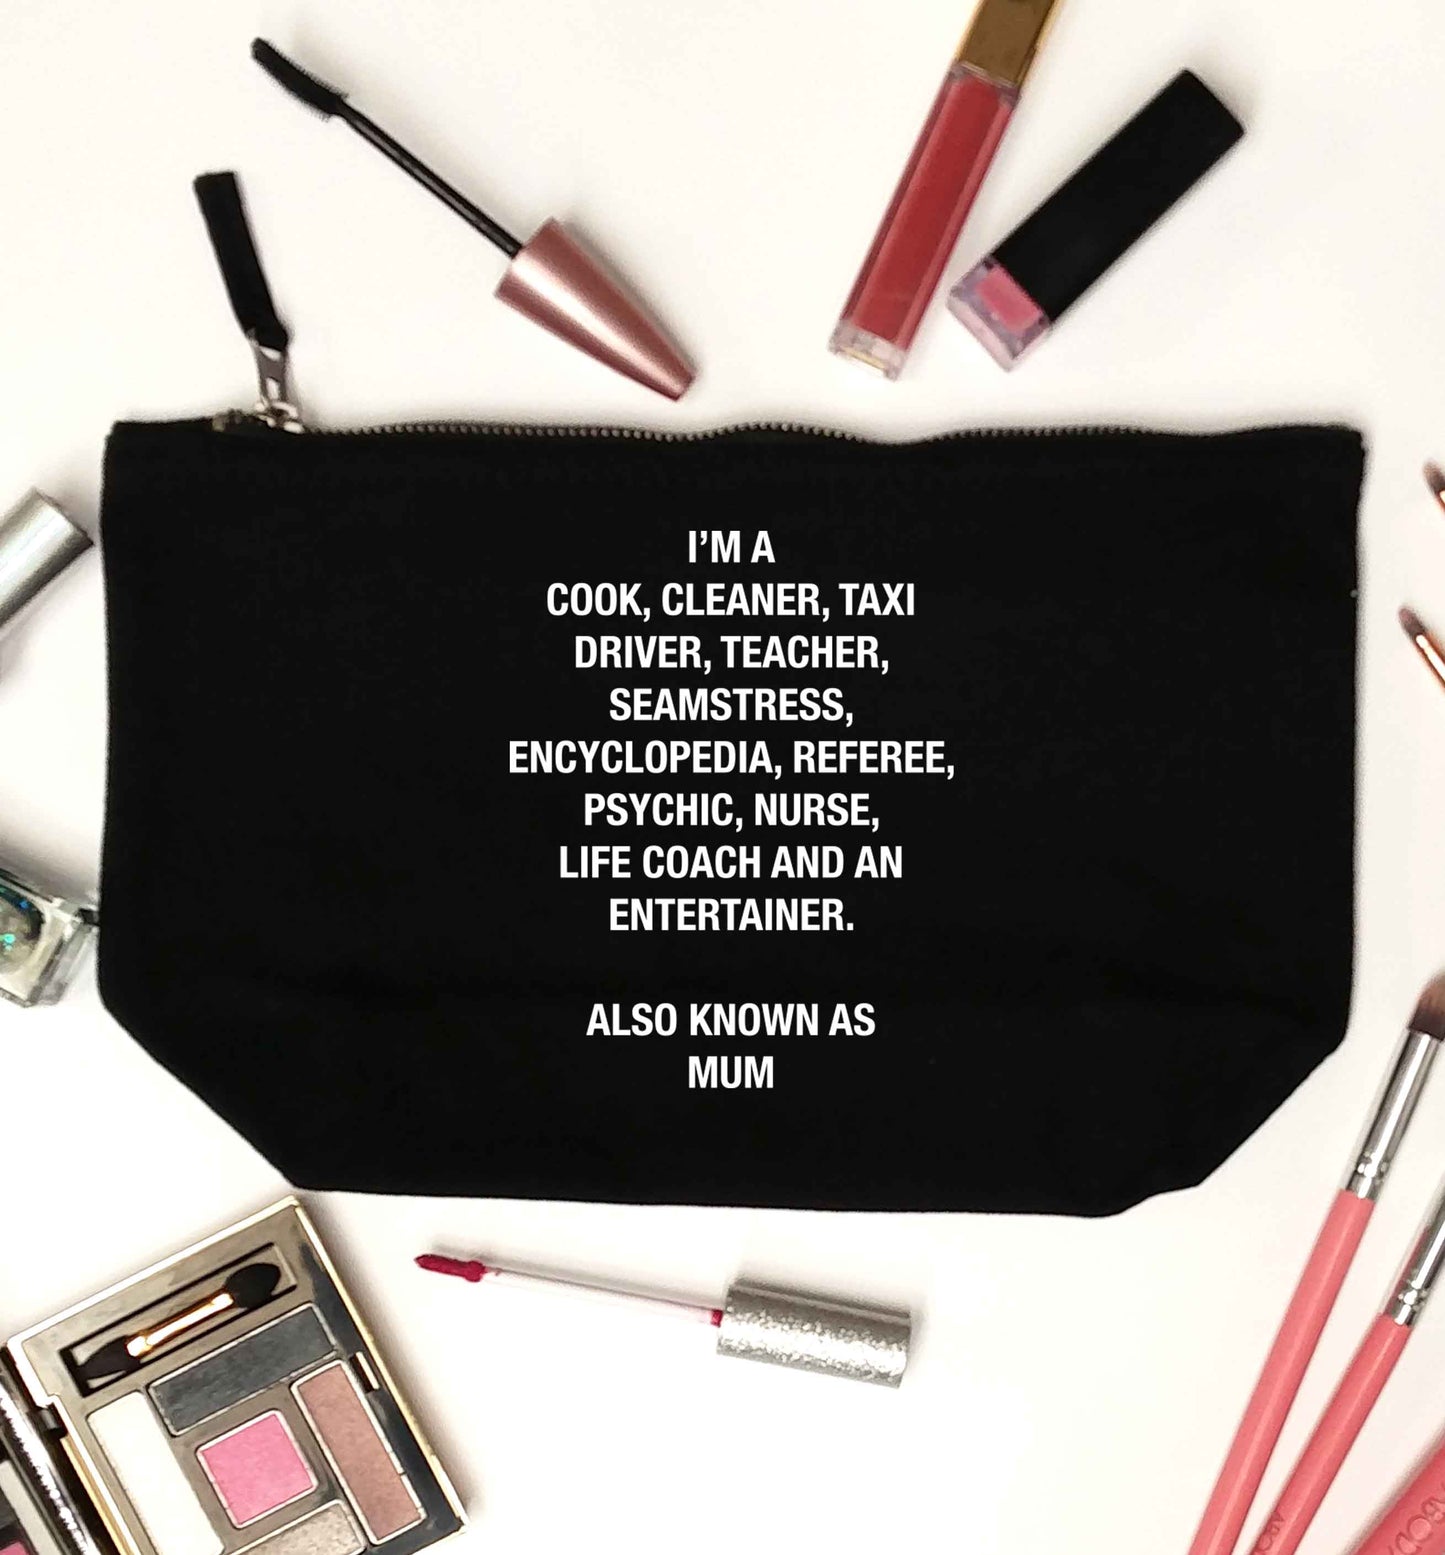 Funny gifts for your mum on mother's dayor her birthday! Mum, cook, cleaner, taxi driver, teacher, seamstress, encyclopedia, referee, psychic, nurse, life coach and entertainer black makeup bag